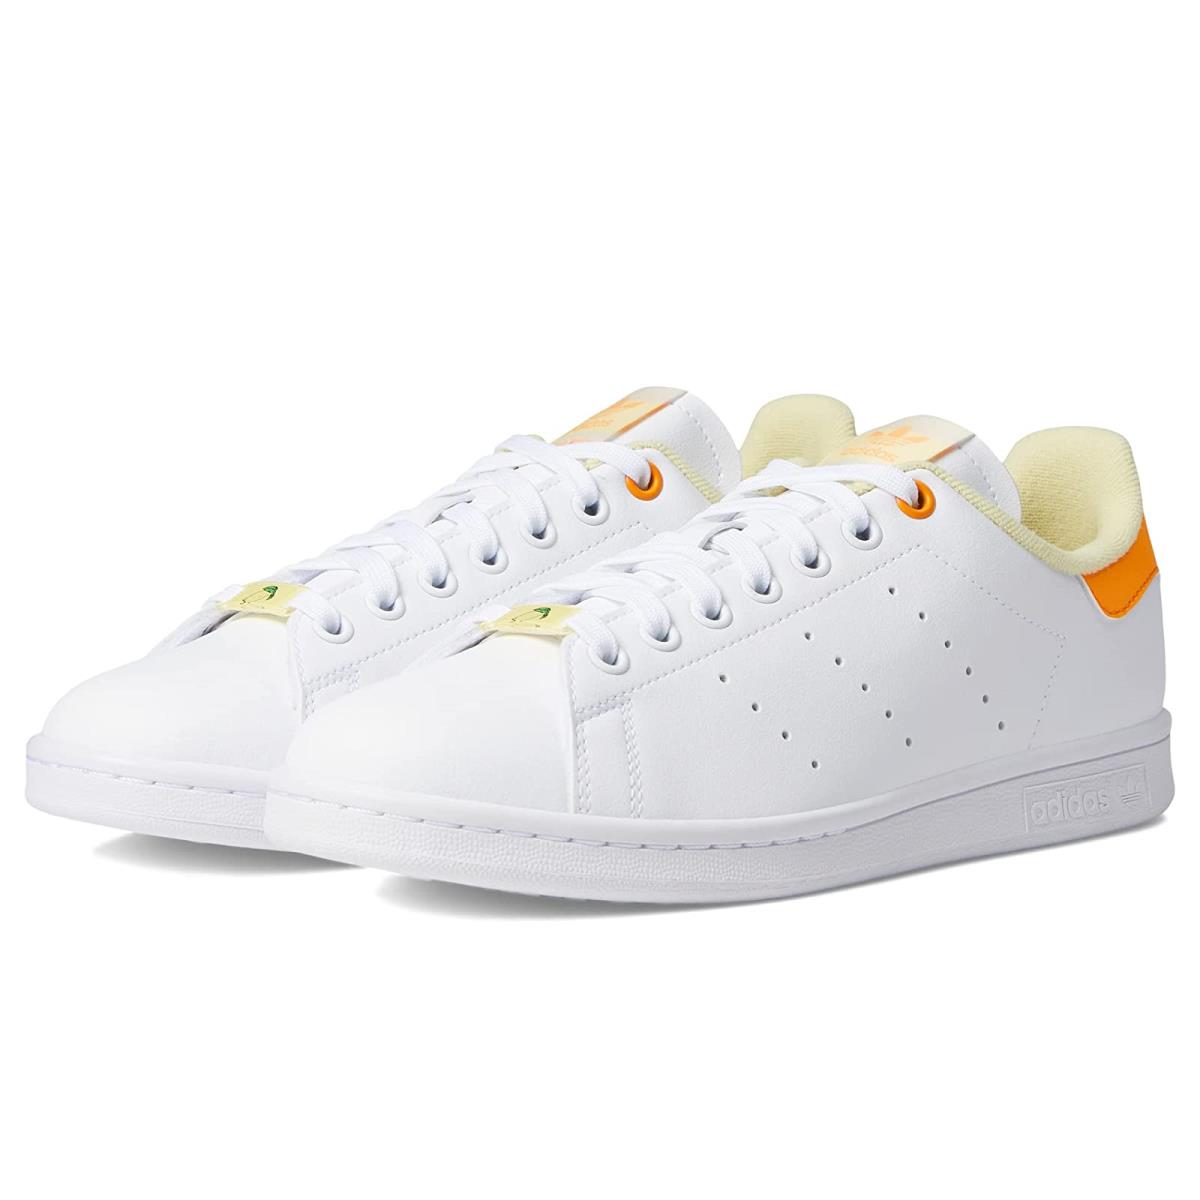 Woman`s Sneakers Athletic Shoes Adidas Originals Stan Smith Her Vegan W White/Almost Yellow/Orange Rush